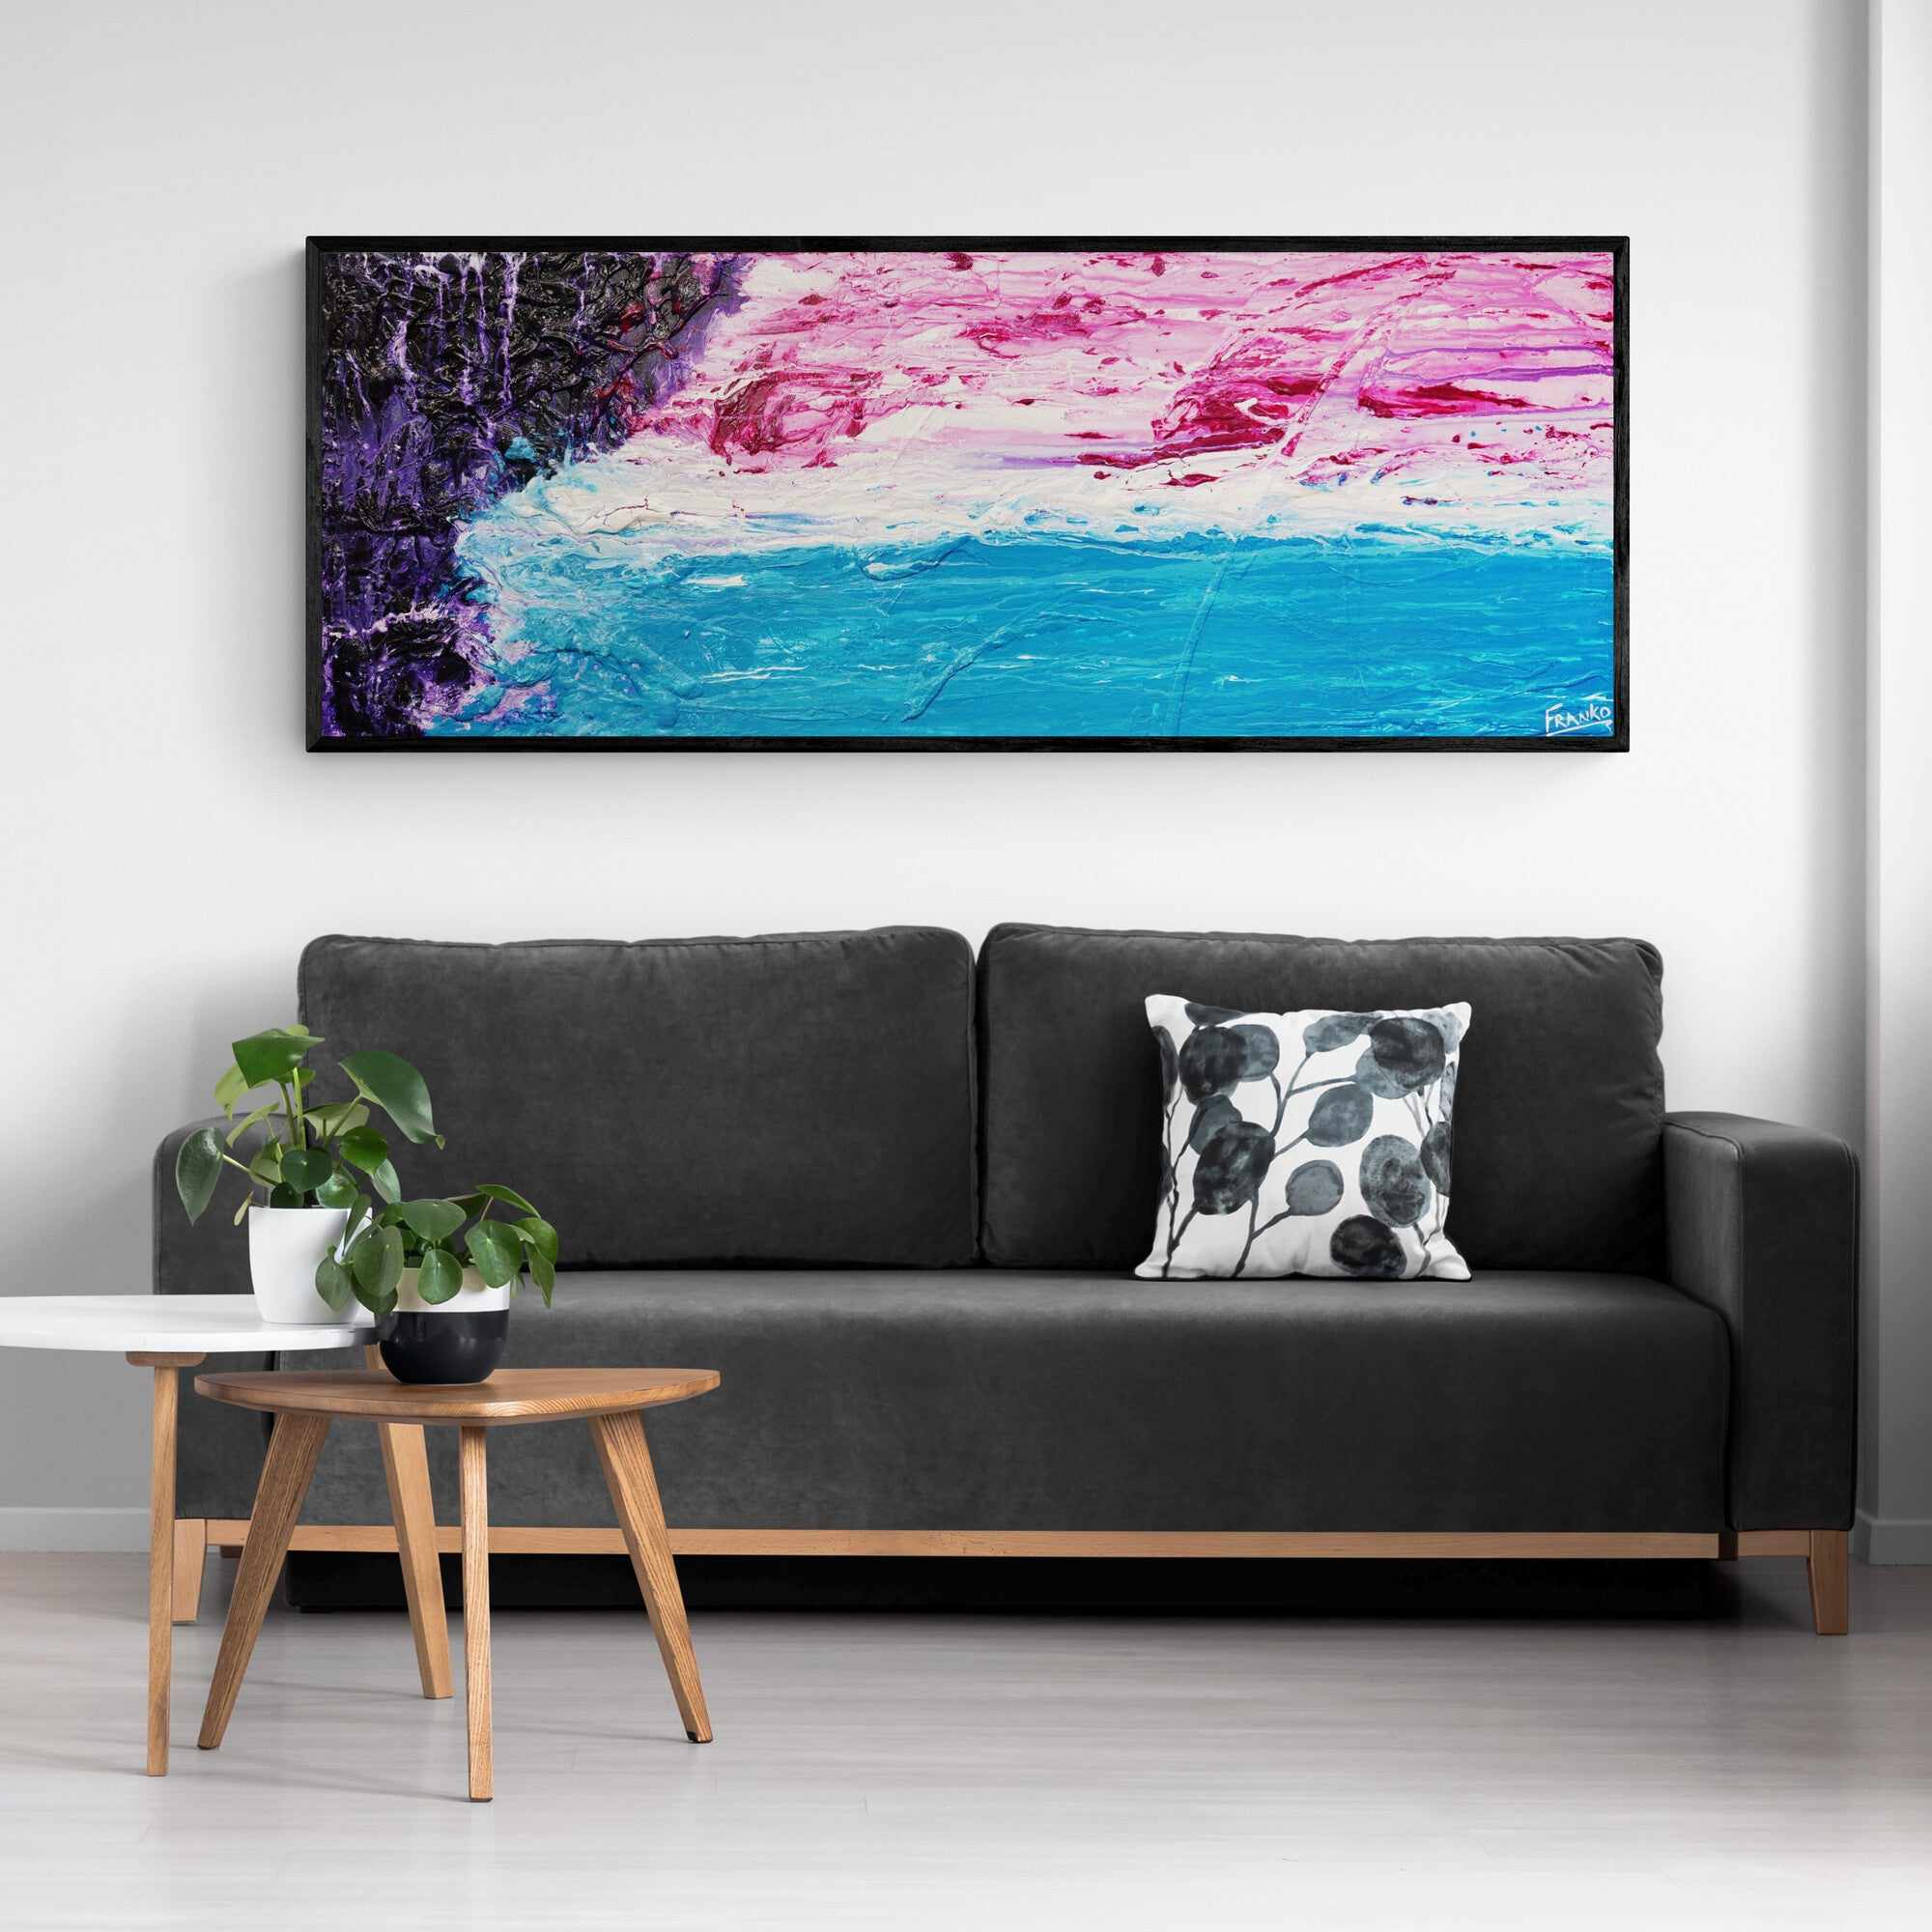 Don't Let Me Go 160cm x 60cm Blue Pink Purple Textured Abstract Painting (SOLD)-abstract-Franko-[franko_artist]-[Art]-[interior_design]-Franklin Art Studio